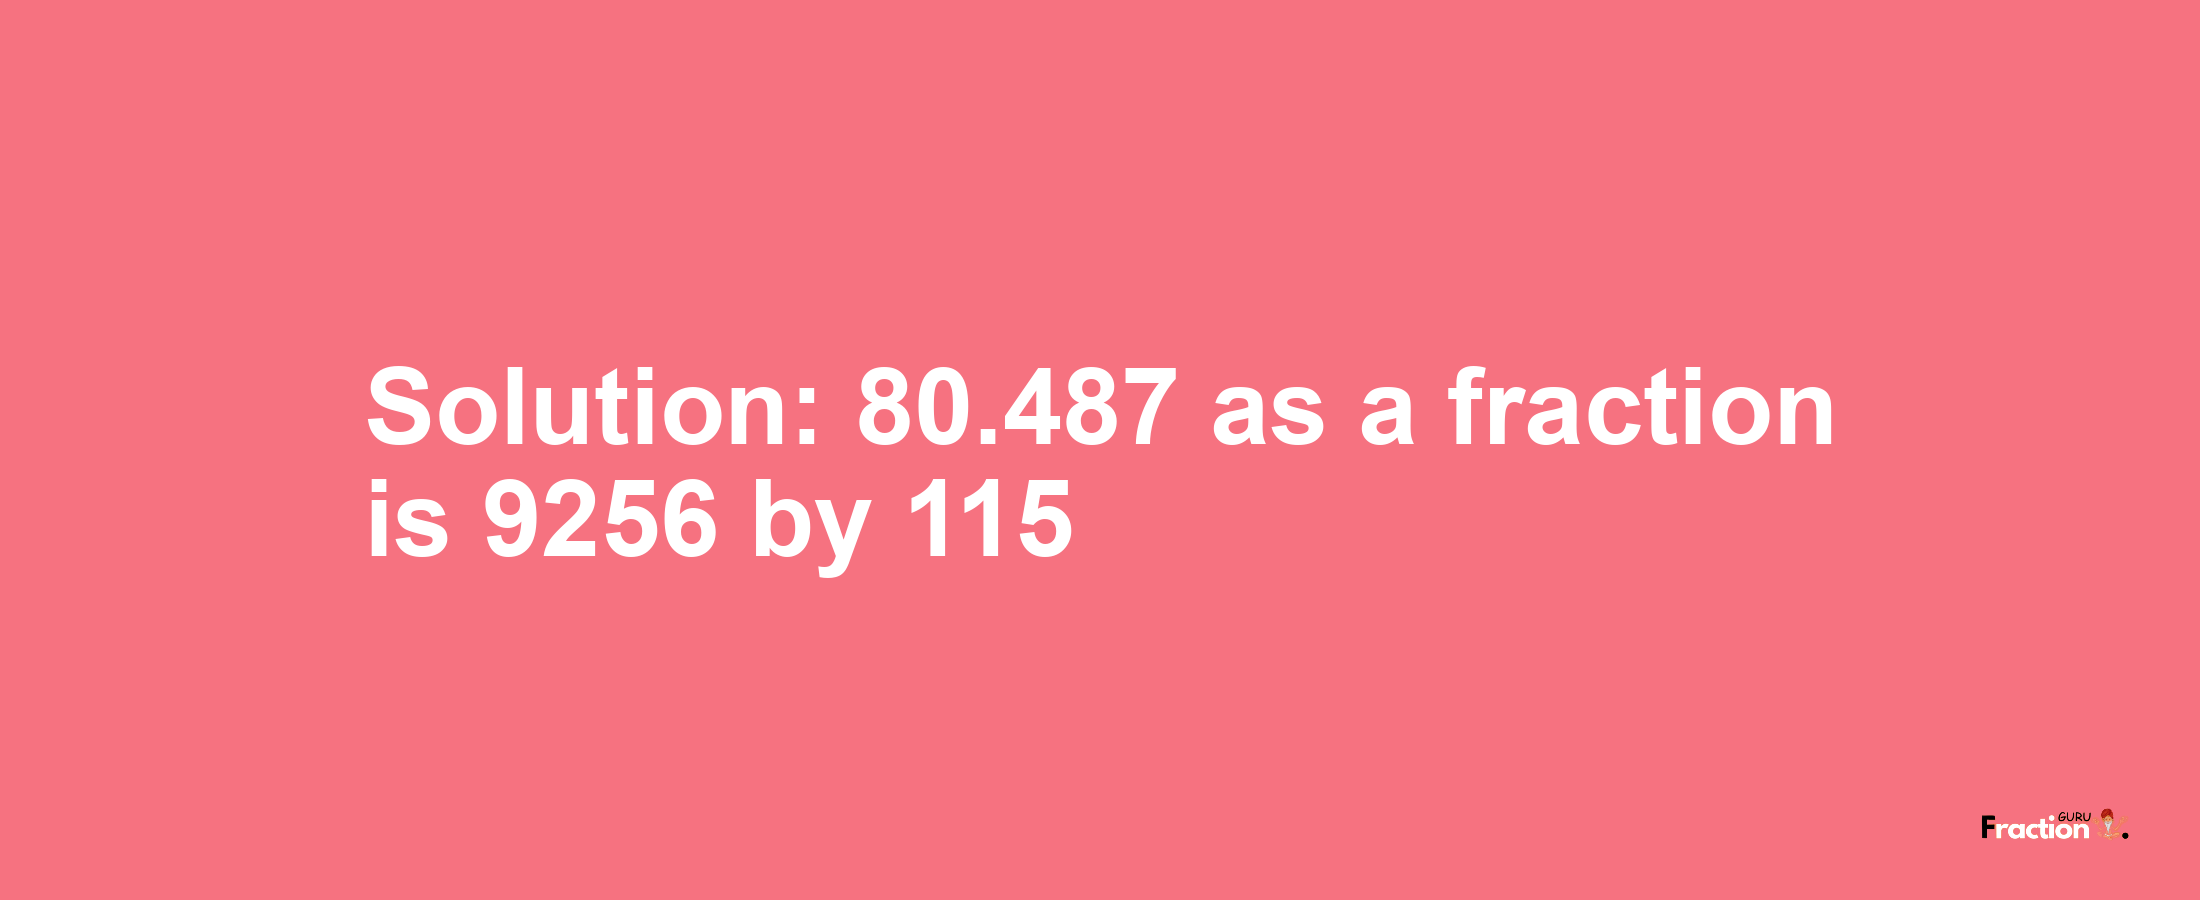 Solution:80.487 as a fraction is 9256/115